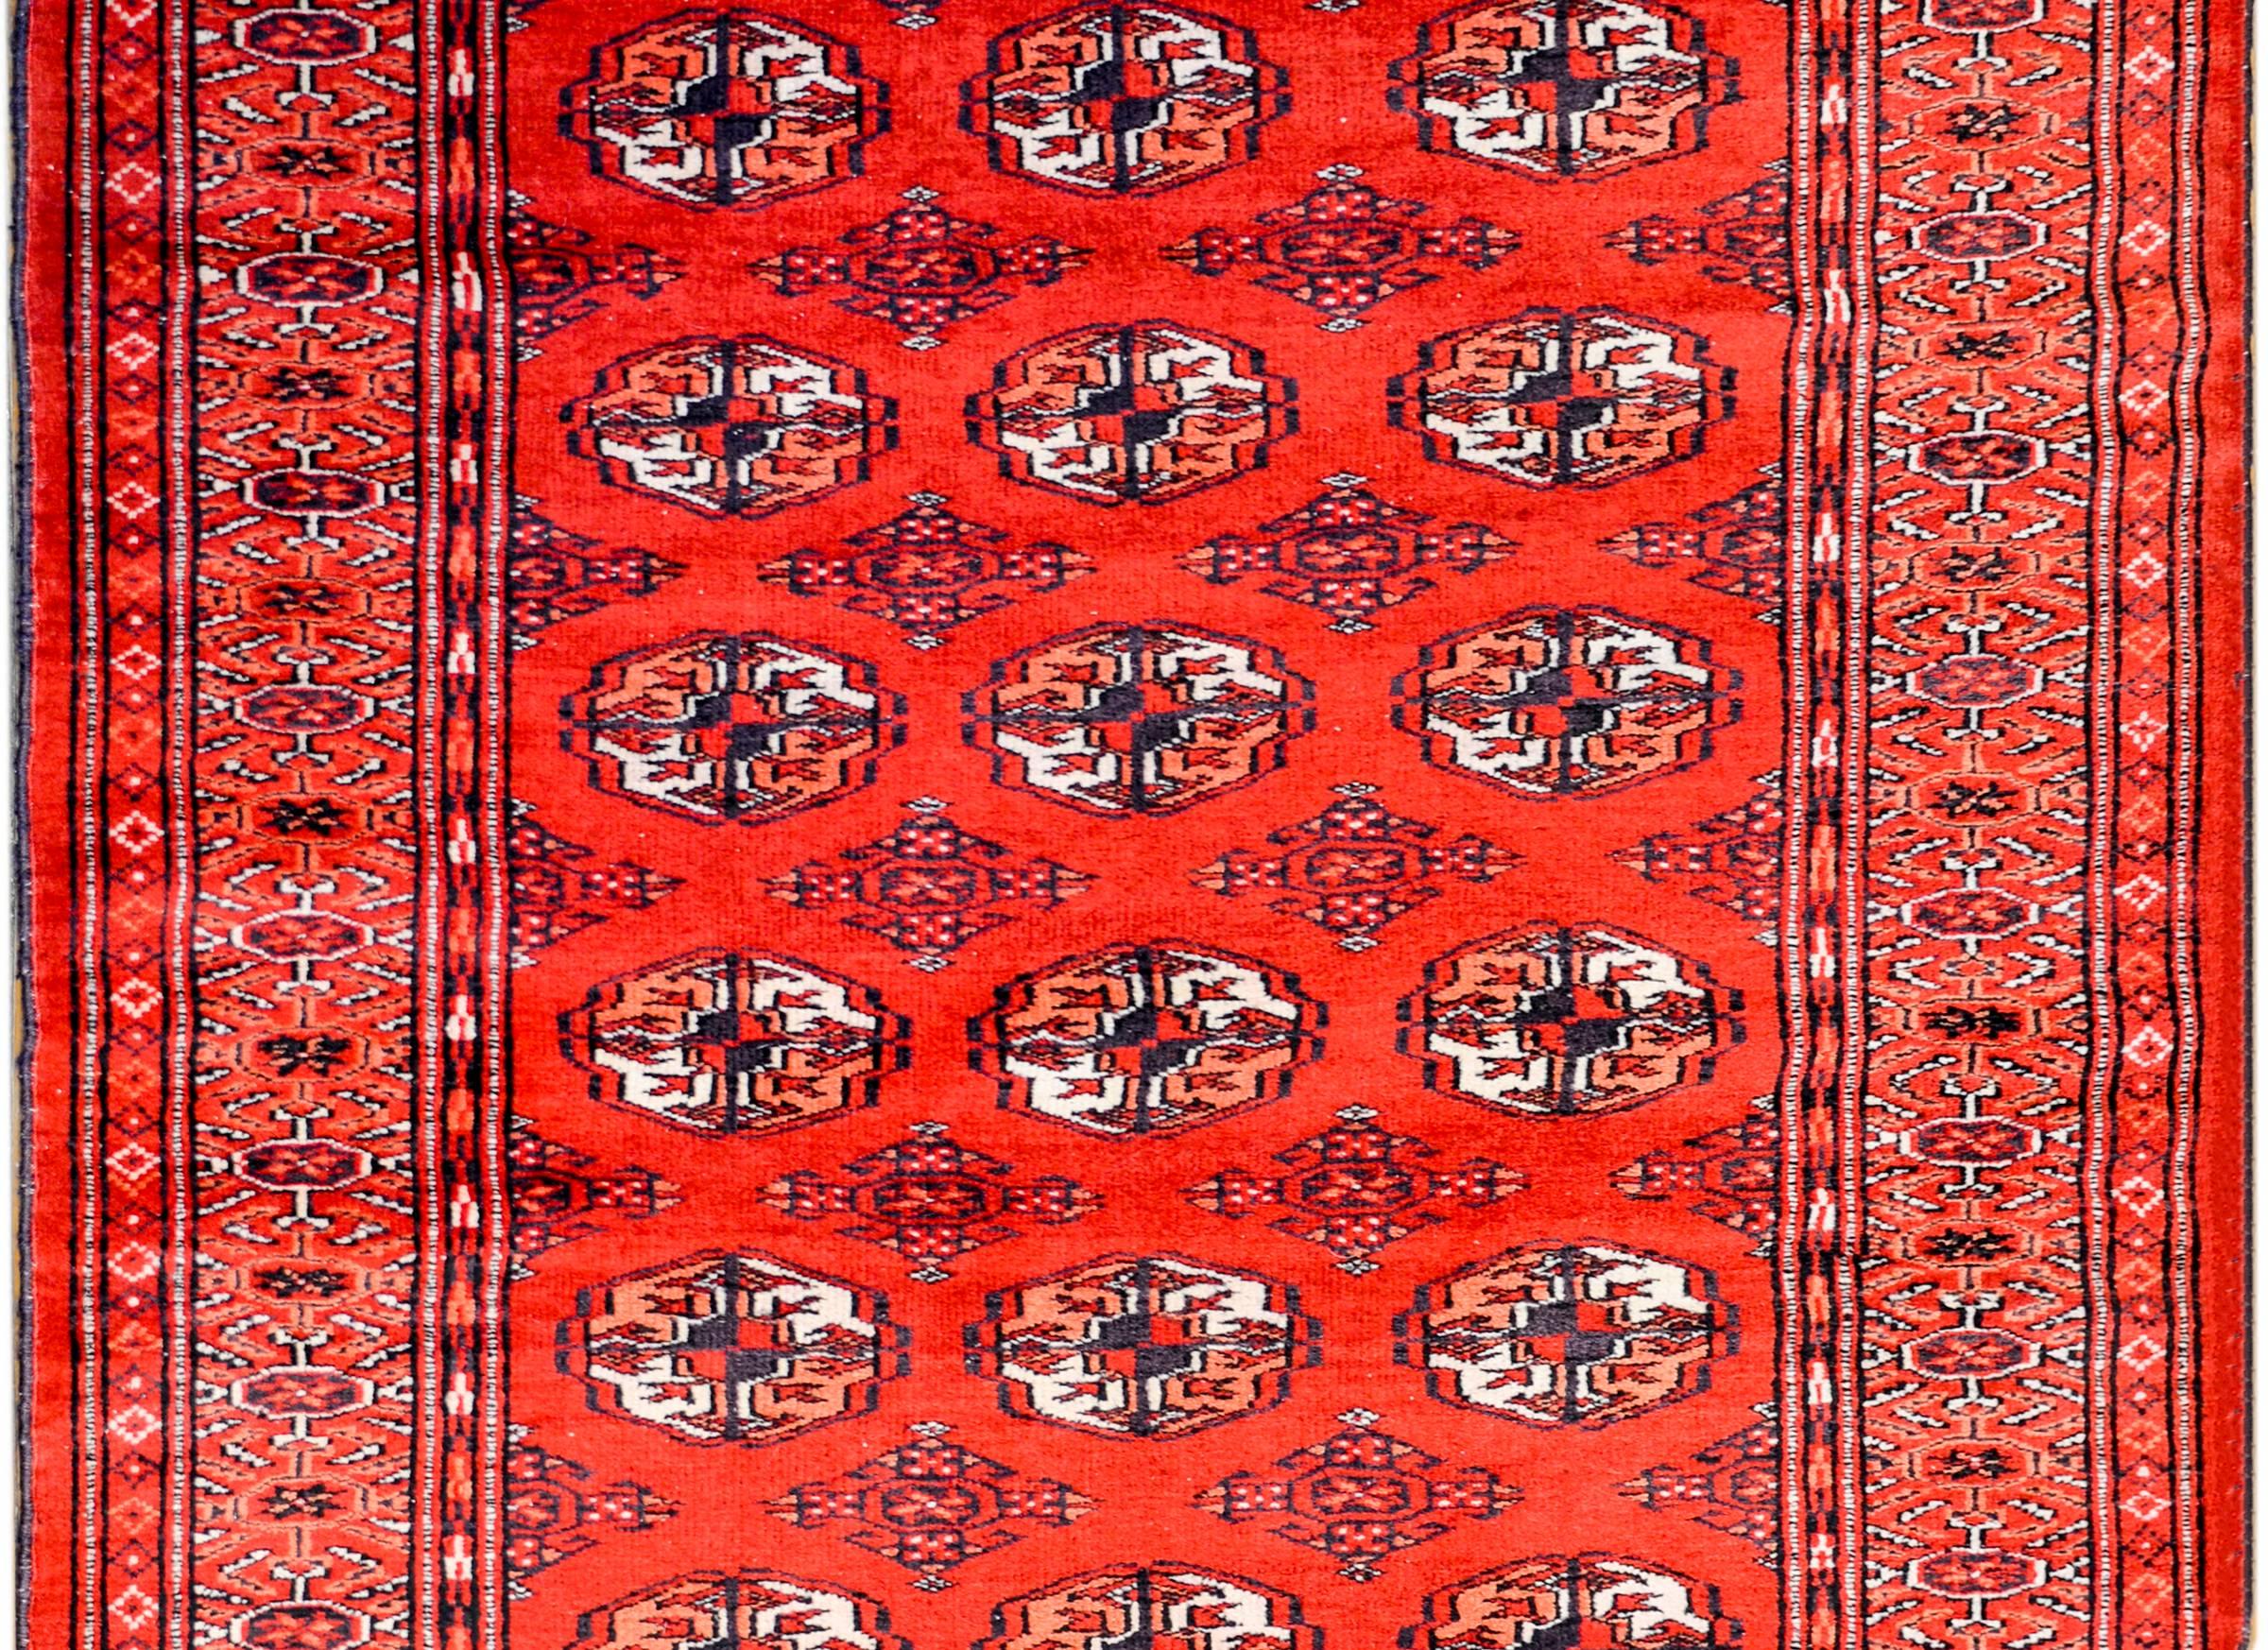 An amazing vintage Pakistani Bokhara rug with an all-over pattern of crimson, indigo, and white wool lozenge form medallions on a dark crimson background. The border is wide with a large complementary geometric pattern.